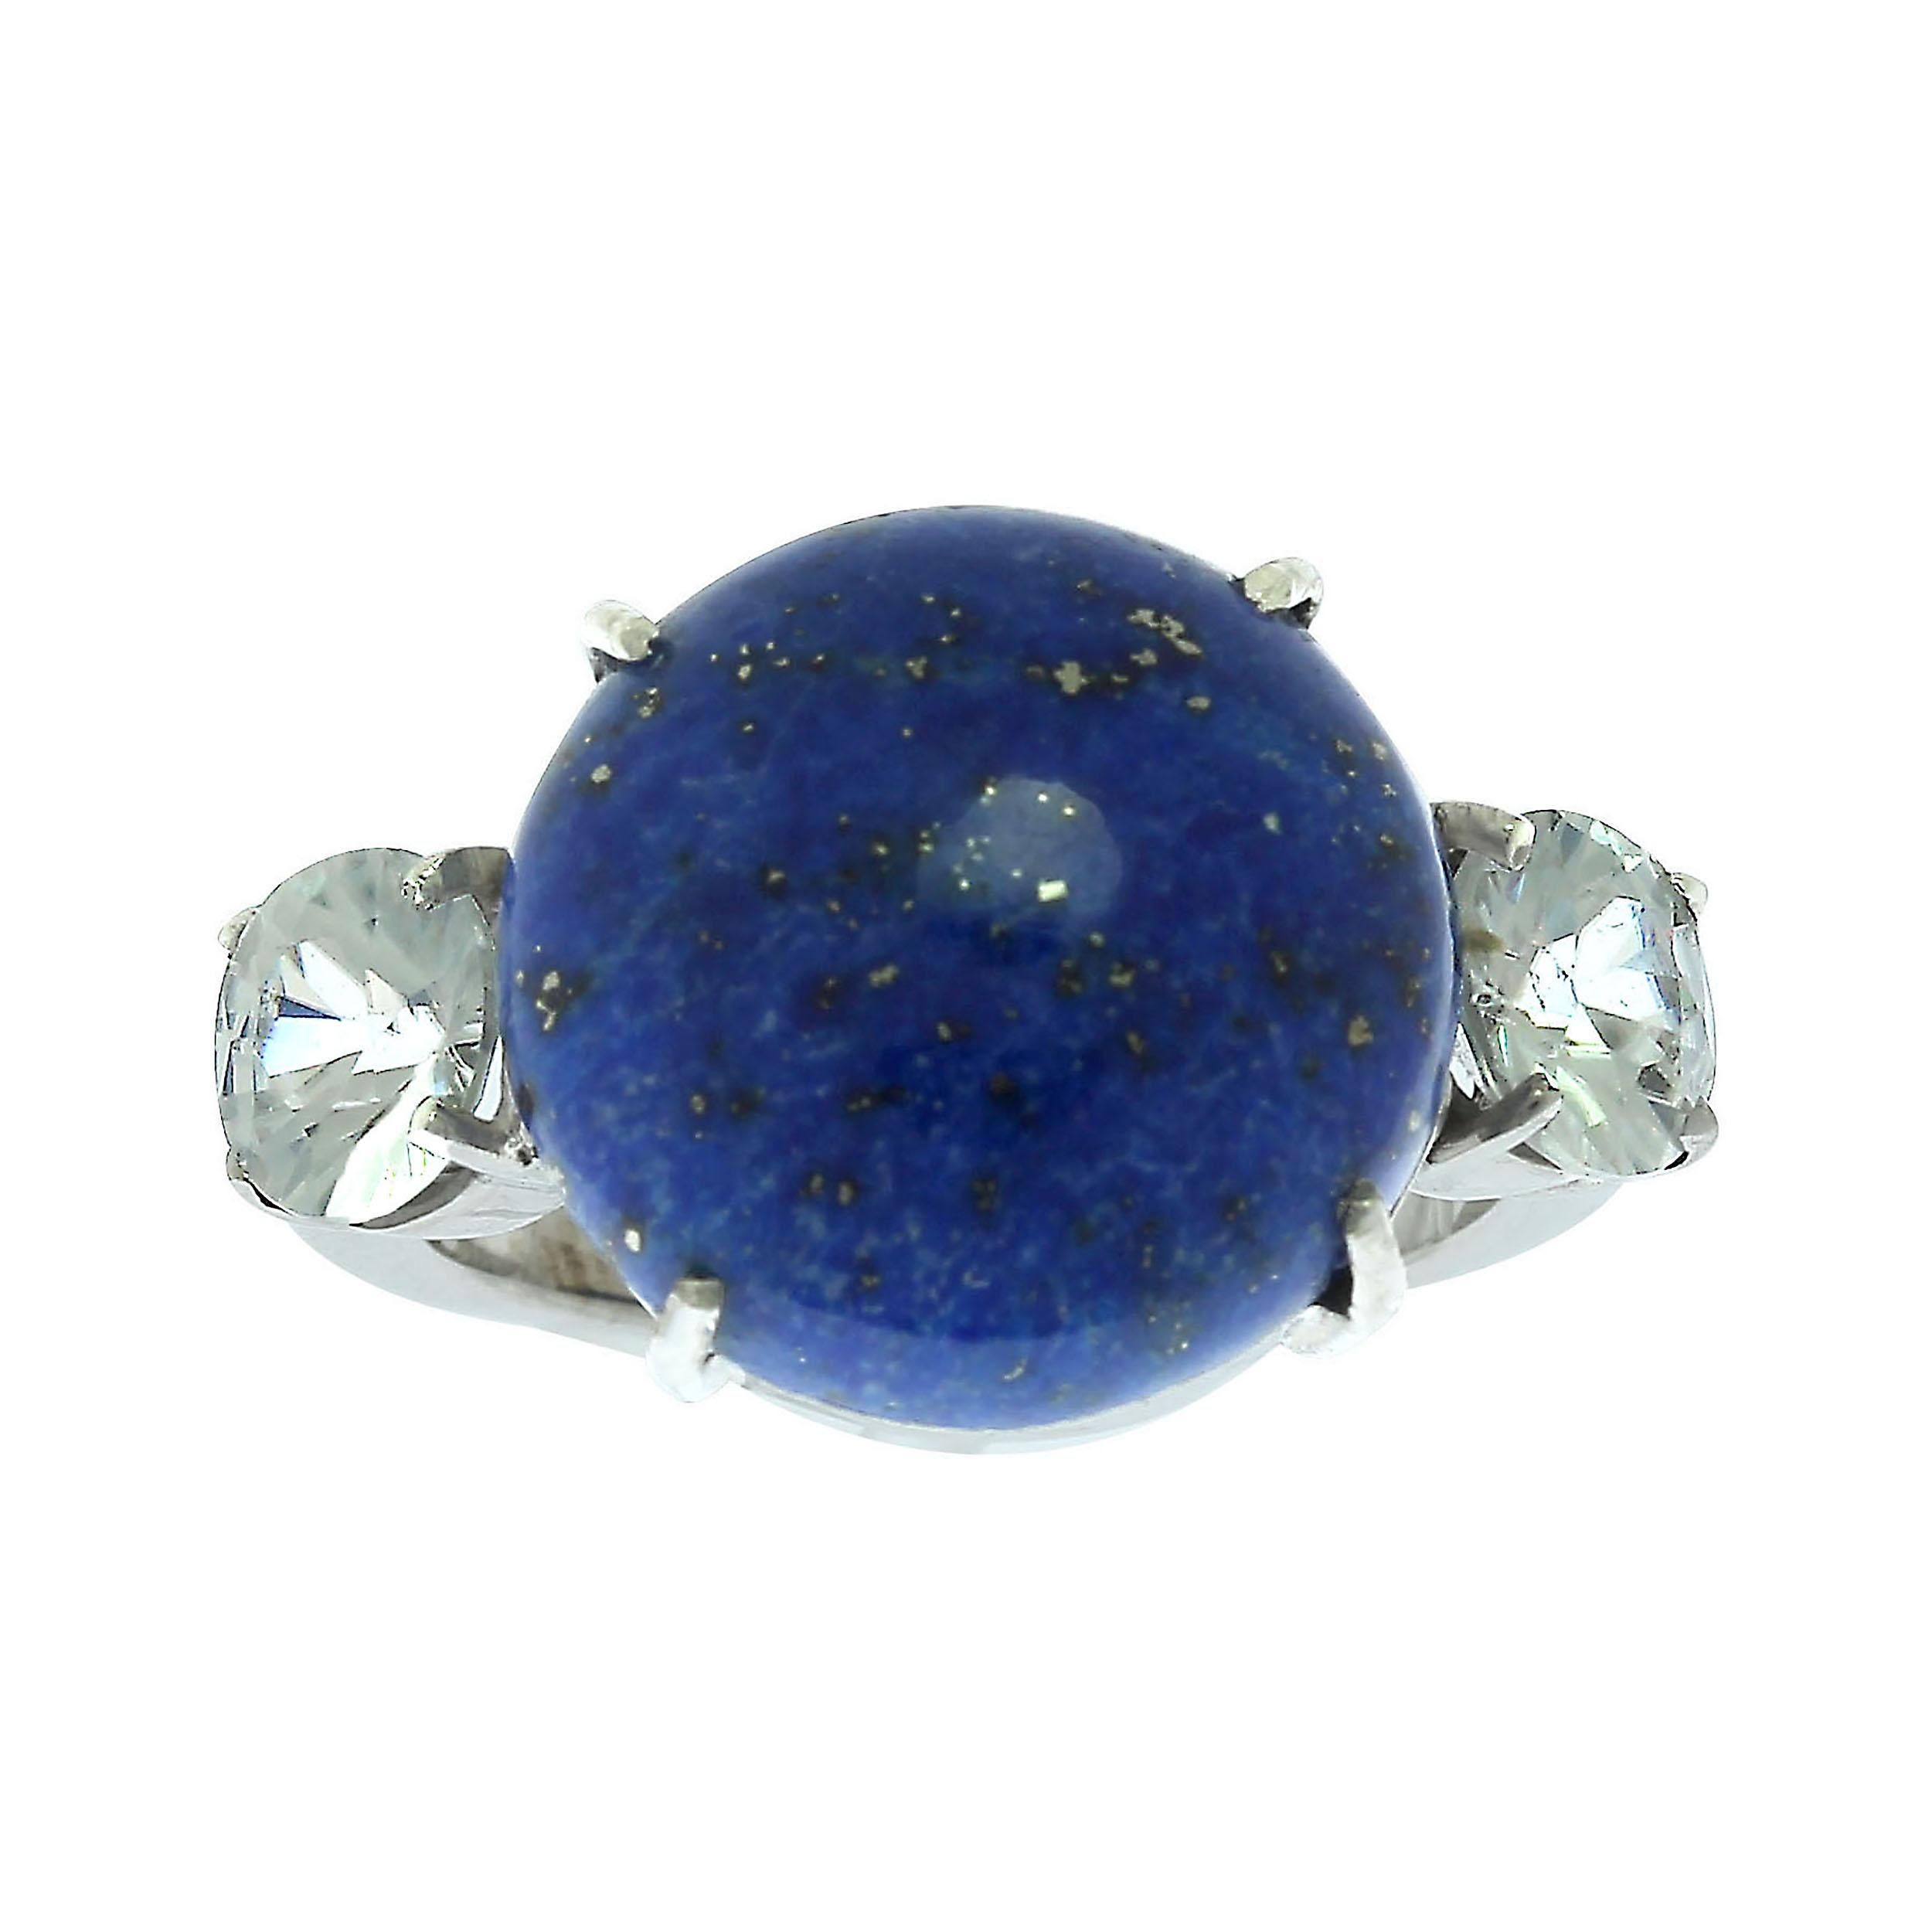 Simplicity and Elegance combine to create this Lapis Lazuli and Cambodian Zircon unique Gemjunky ring.  This is a highly polished, 15 MM round Lapis Lazuli cabochon flanked by two glittering white round Cambodian Zircons. The hand made setting is